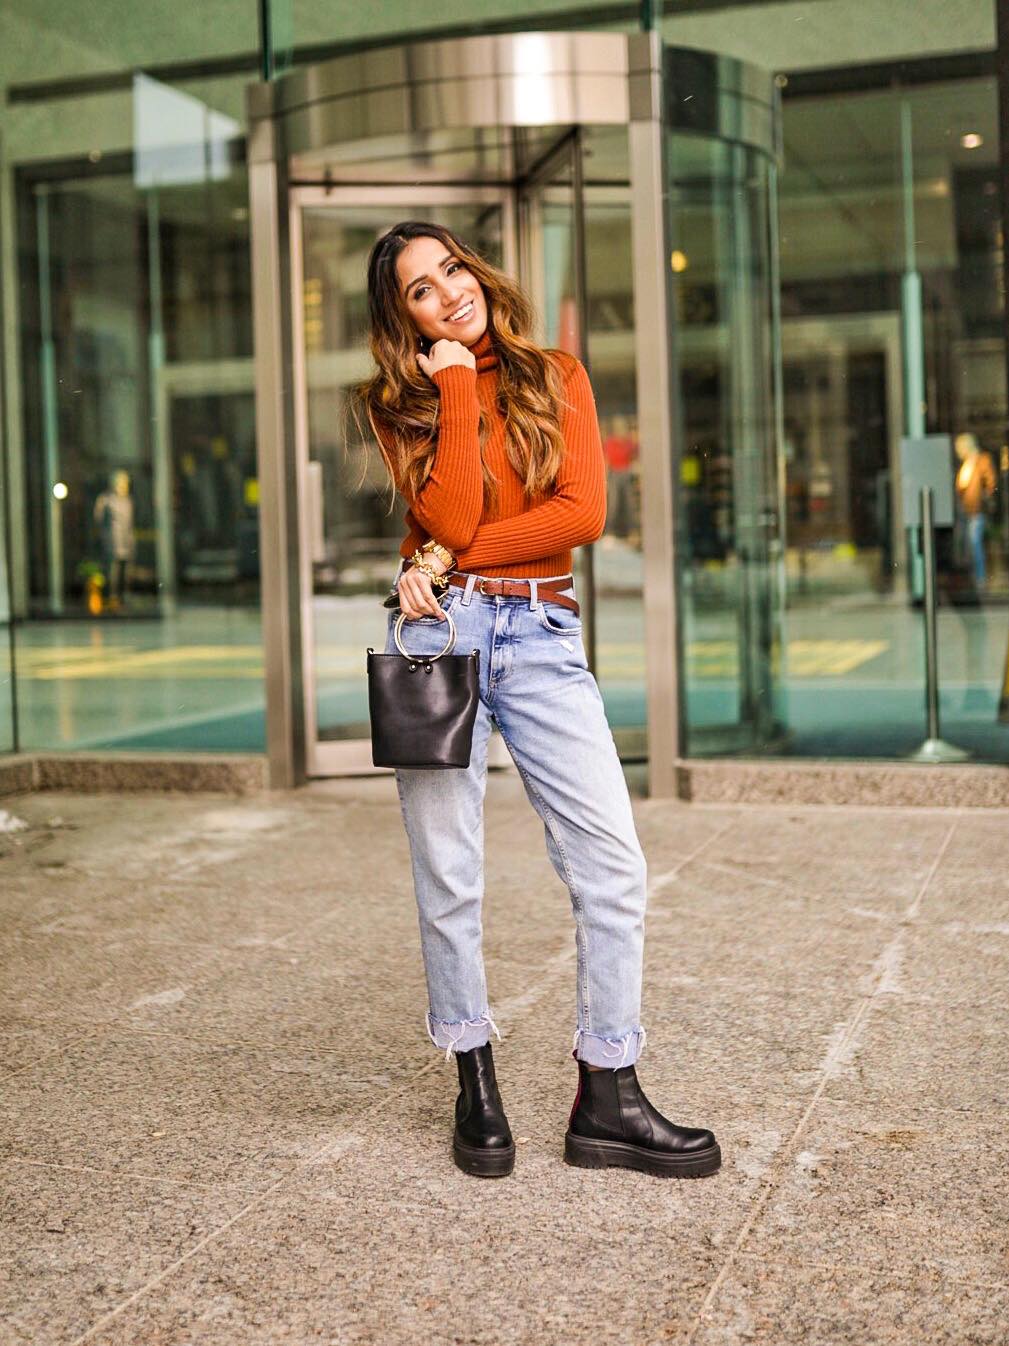 Street Style Boyfriend Jeans Toronto Fashion Week Ootd Hm Jeans Asos Boots Faiza Inam Sincerely Humble 1 Sincerely Humble